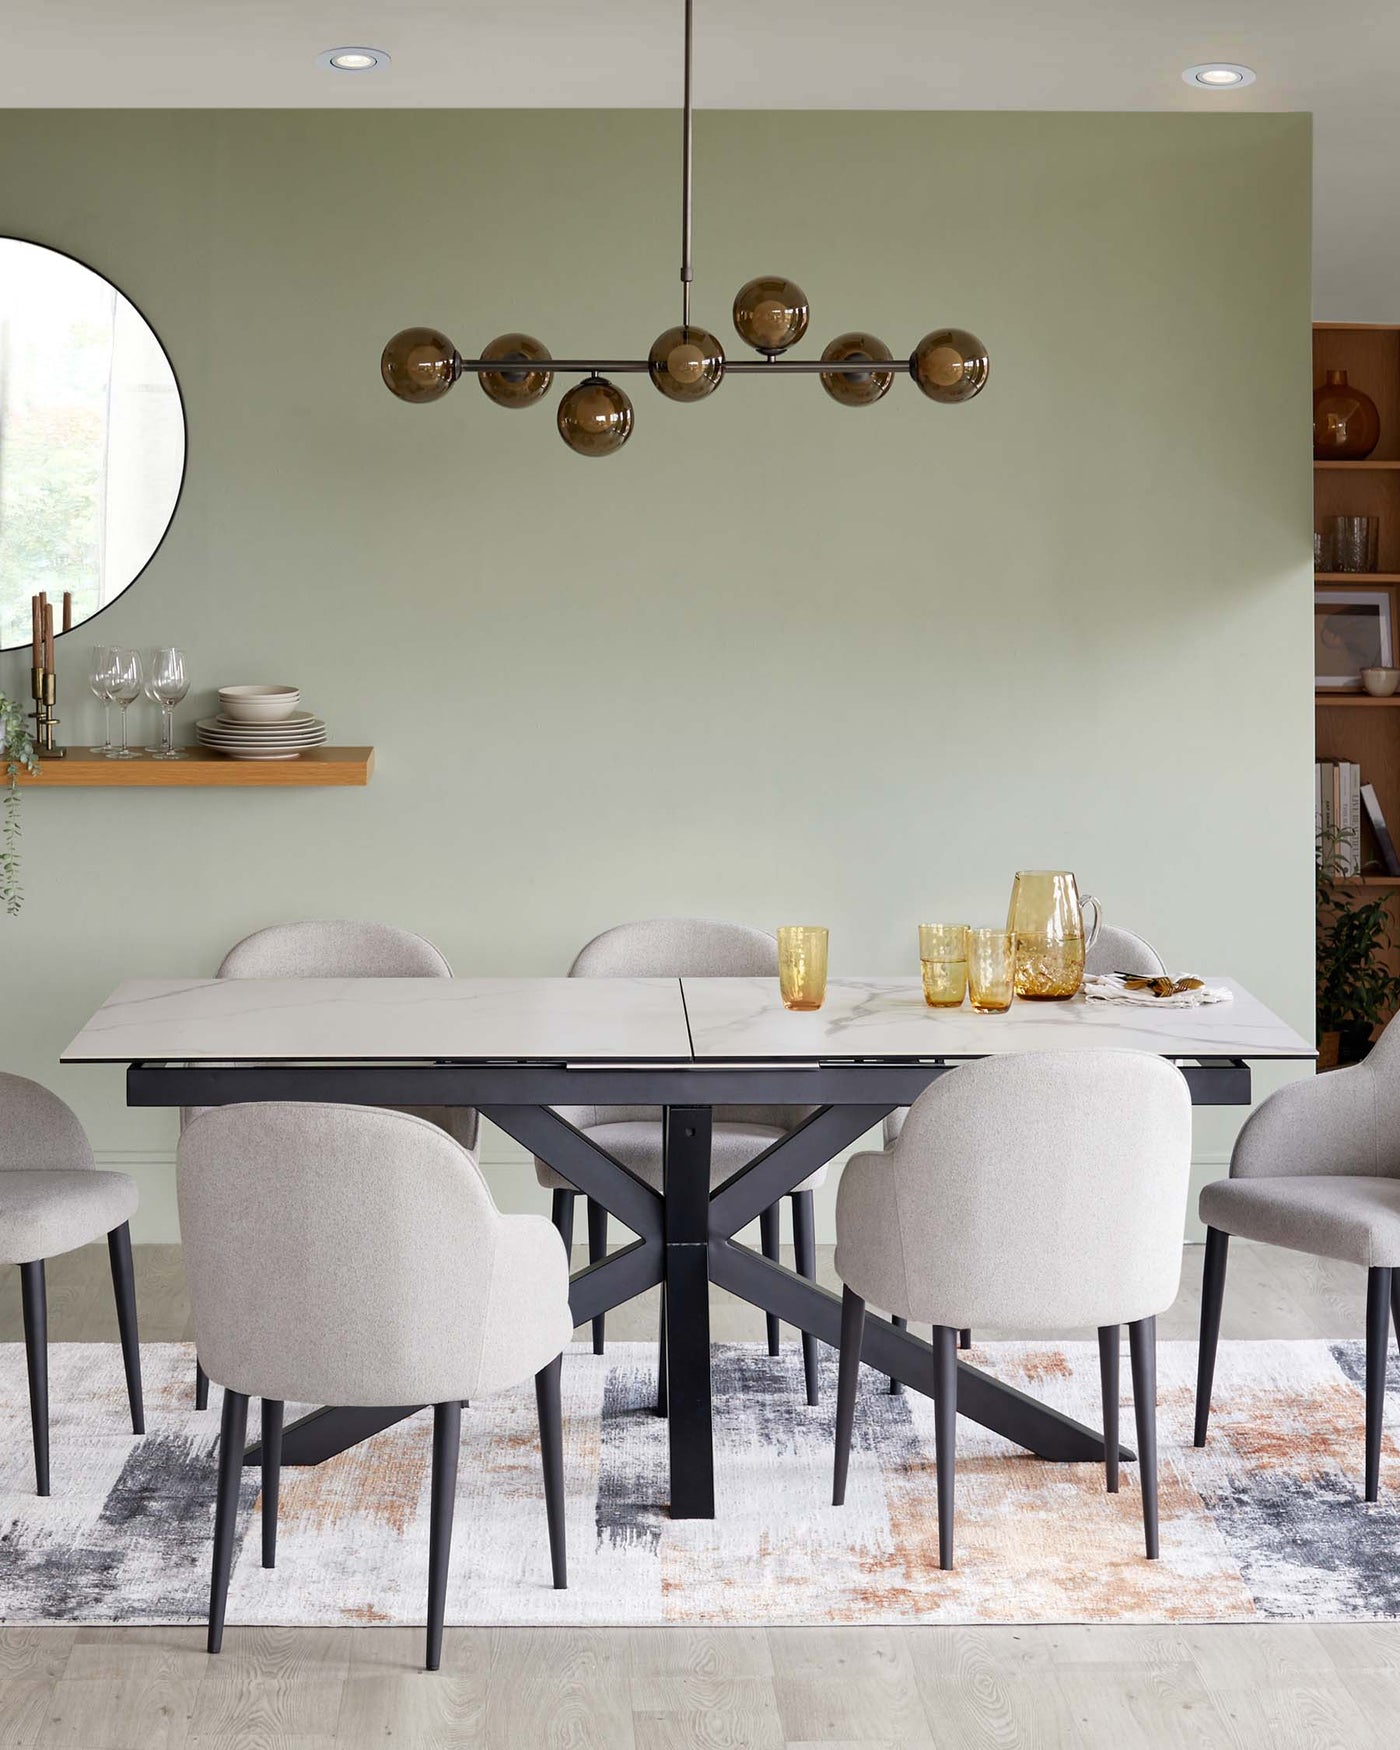 Modern dining room furniture featuring a sleek black dining table with a unique X-shaped base and a smooth white top, surrounded by six plush, light grey upholstered chairs with round seat backs and slender black legs, all staged on a contemporary patterned area rug.